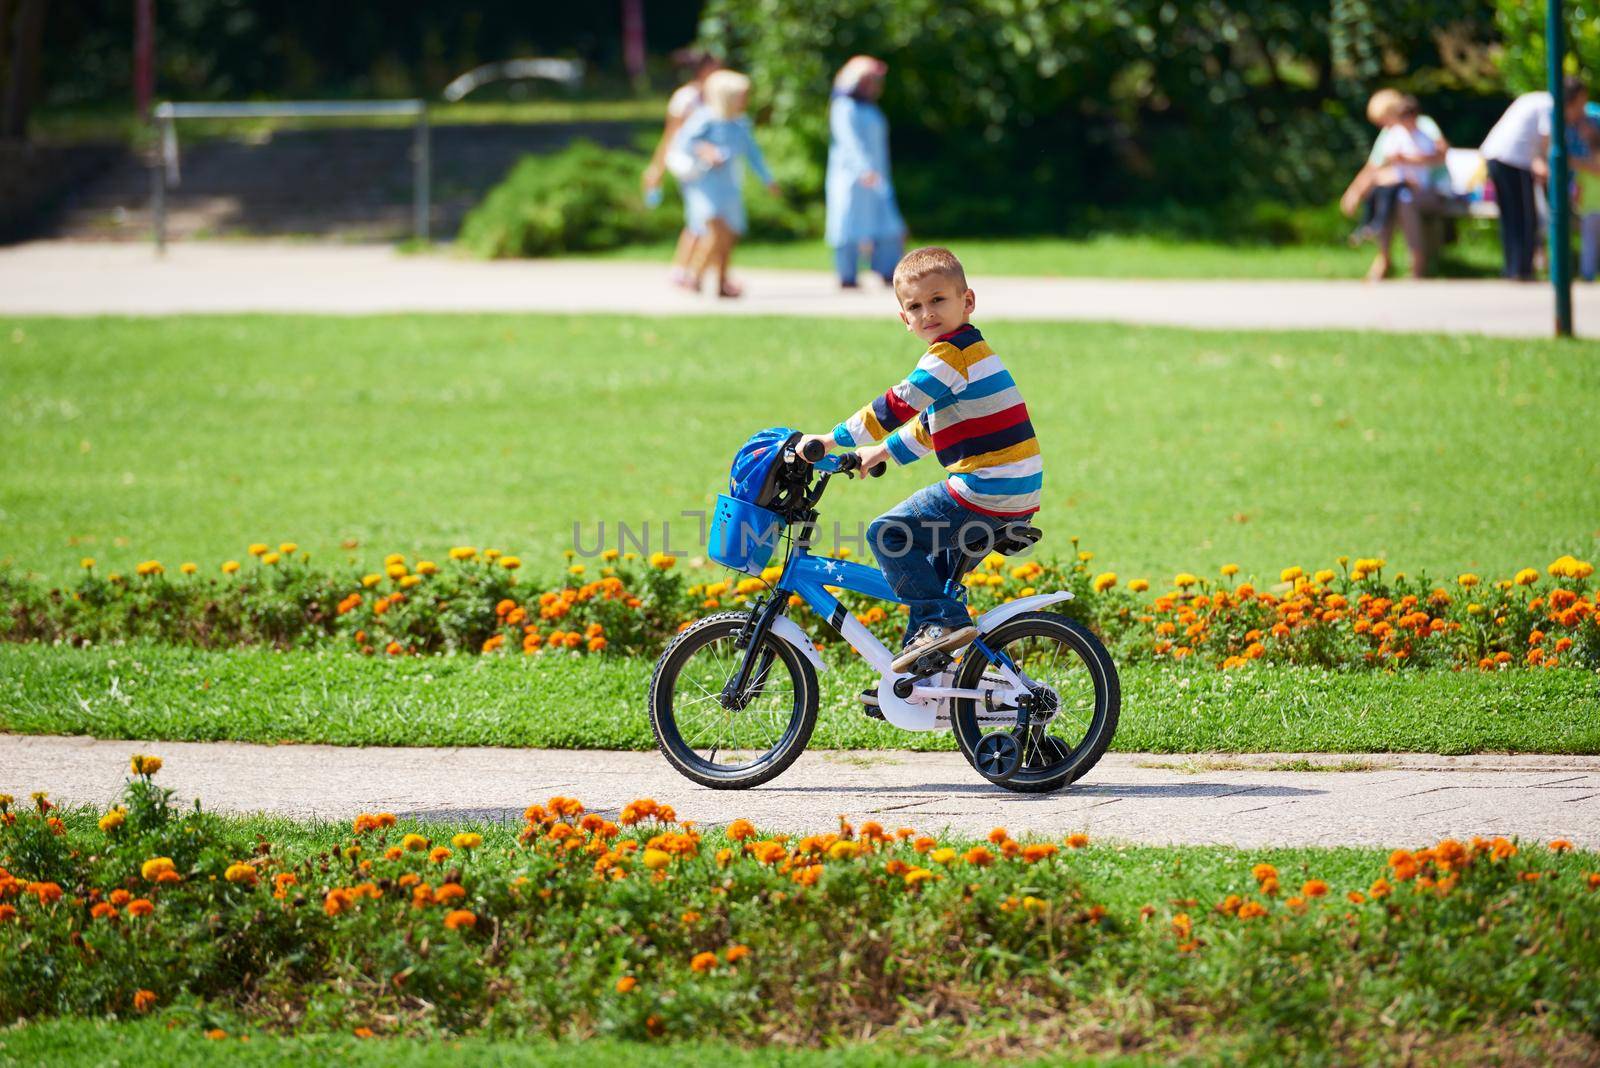 happy little boy have fun in park and learning to ride his first bike